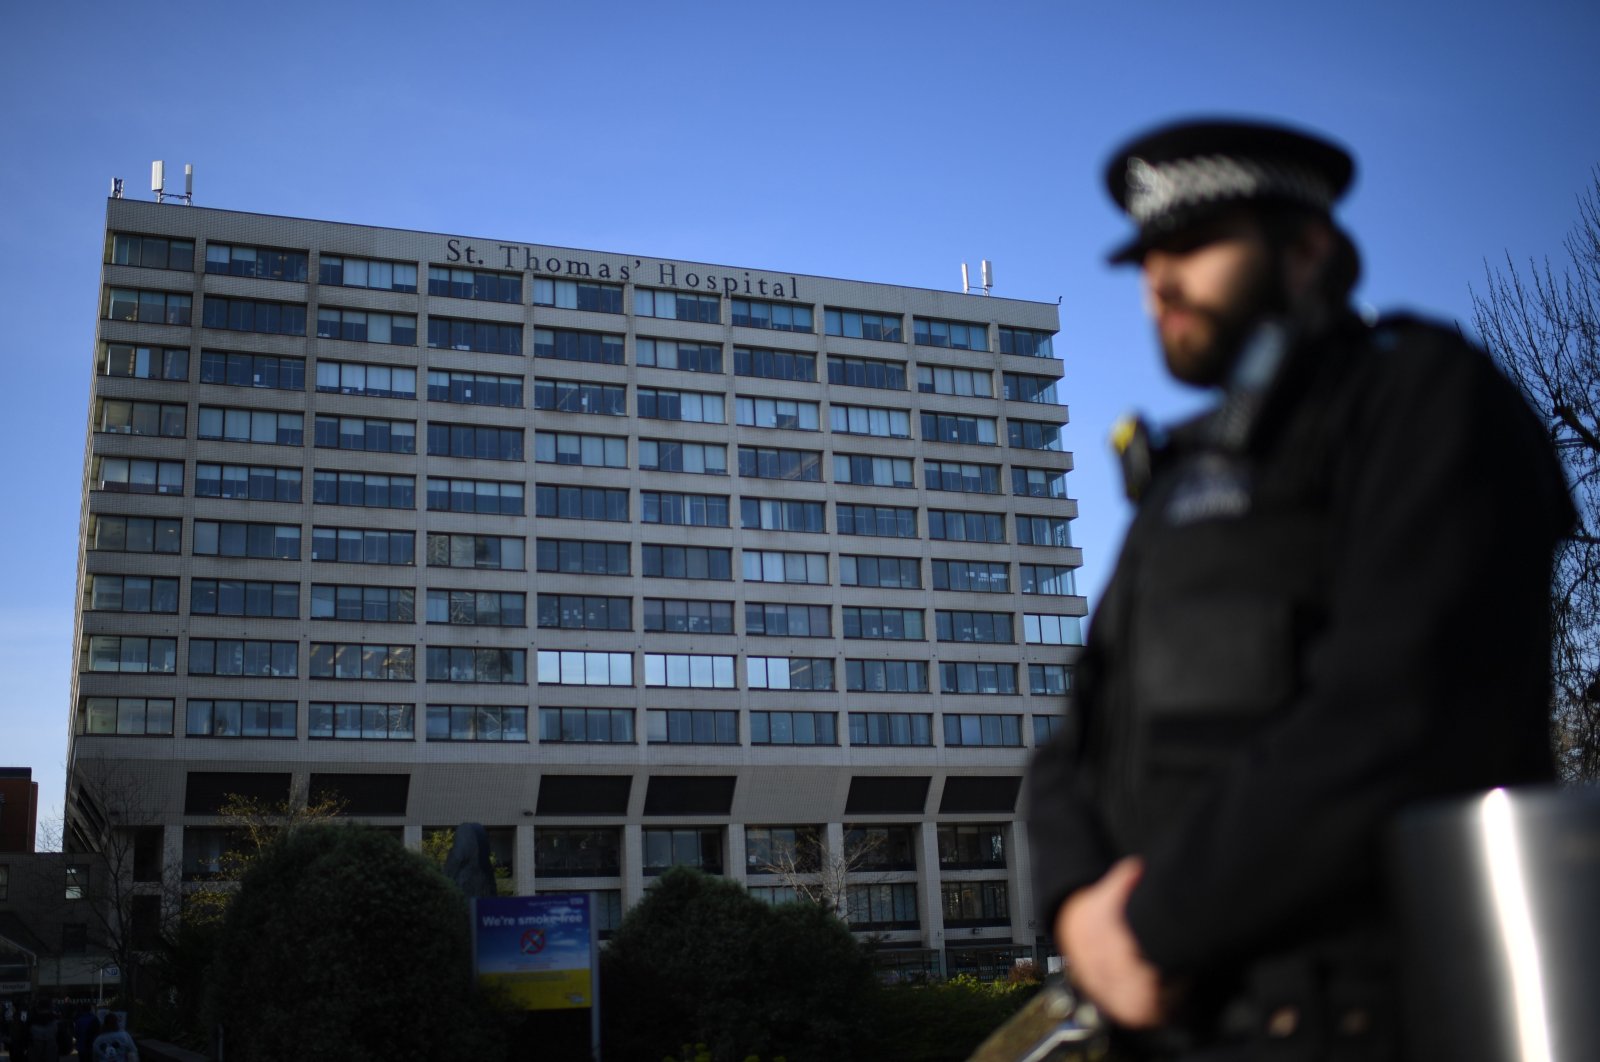 A police officer stands guard at St Thomas' Hospital in central London, U.K., where Britain's Prime Minister Boris Johnson is in intensive care, Tuesday, April 7, 2020. (AFP Photo)